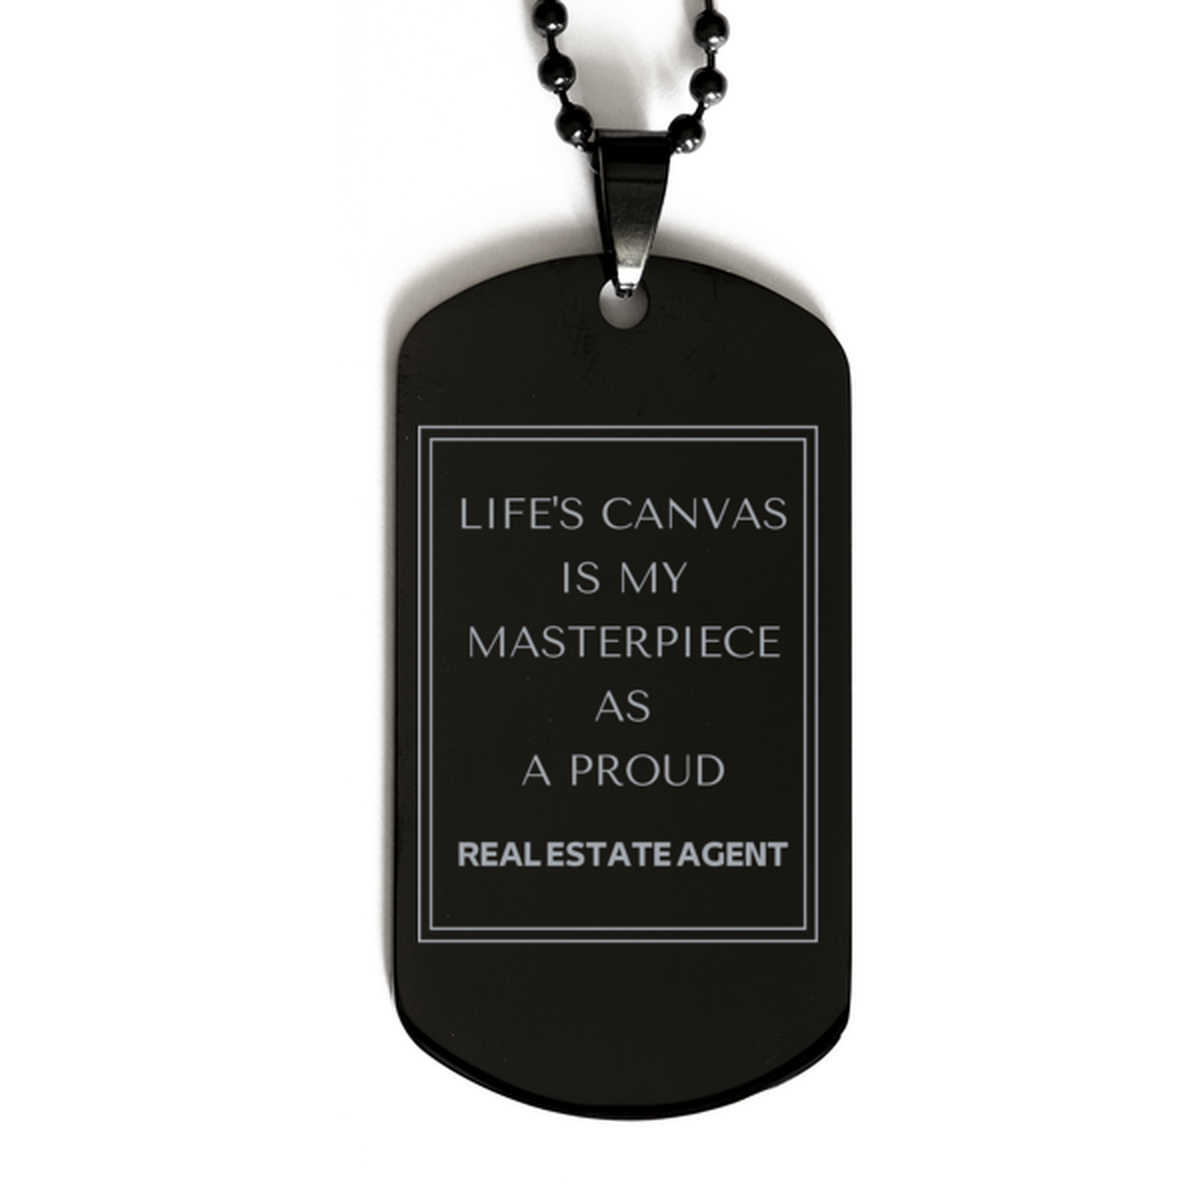 Proud Real Estate Agent Gifts, Life's canvas is my masterpiece, Epic Birthday Christmas Unique Black Dog Tag For Real Estate Agent, Coworkers, Men, Women, Friends